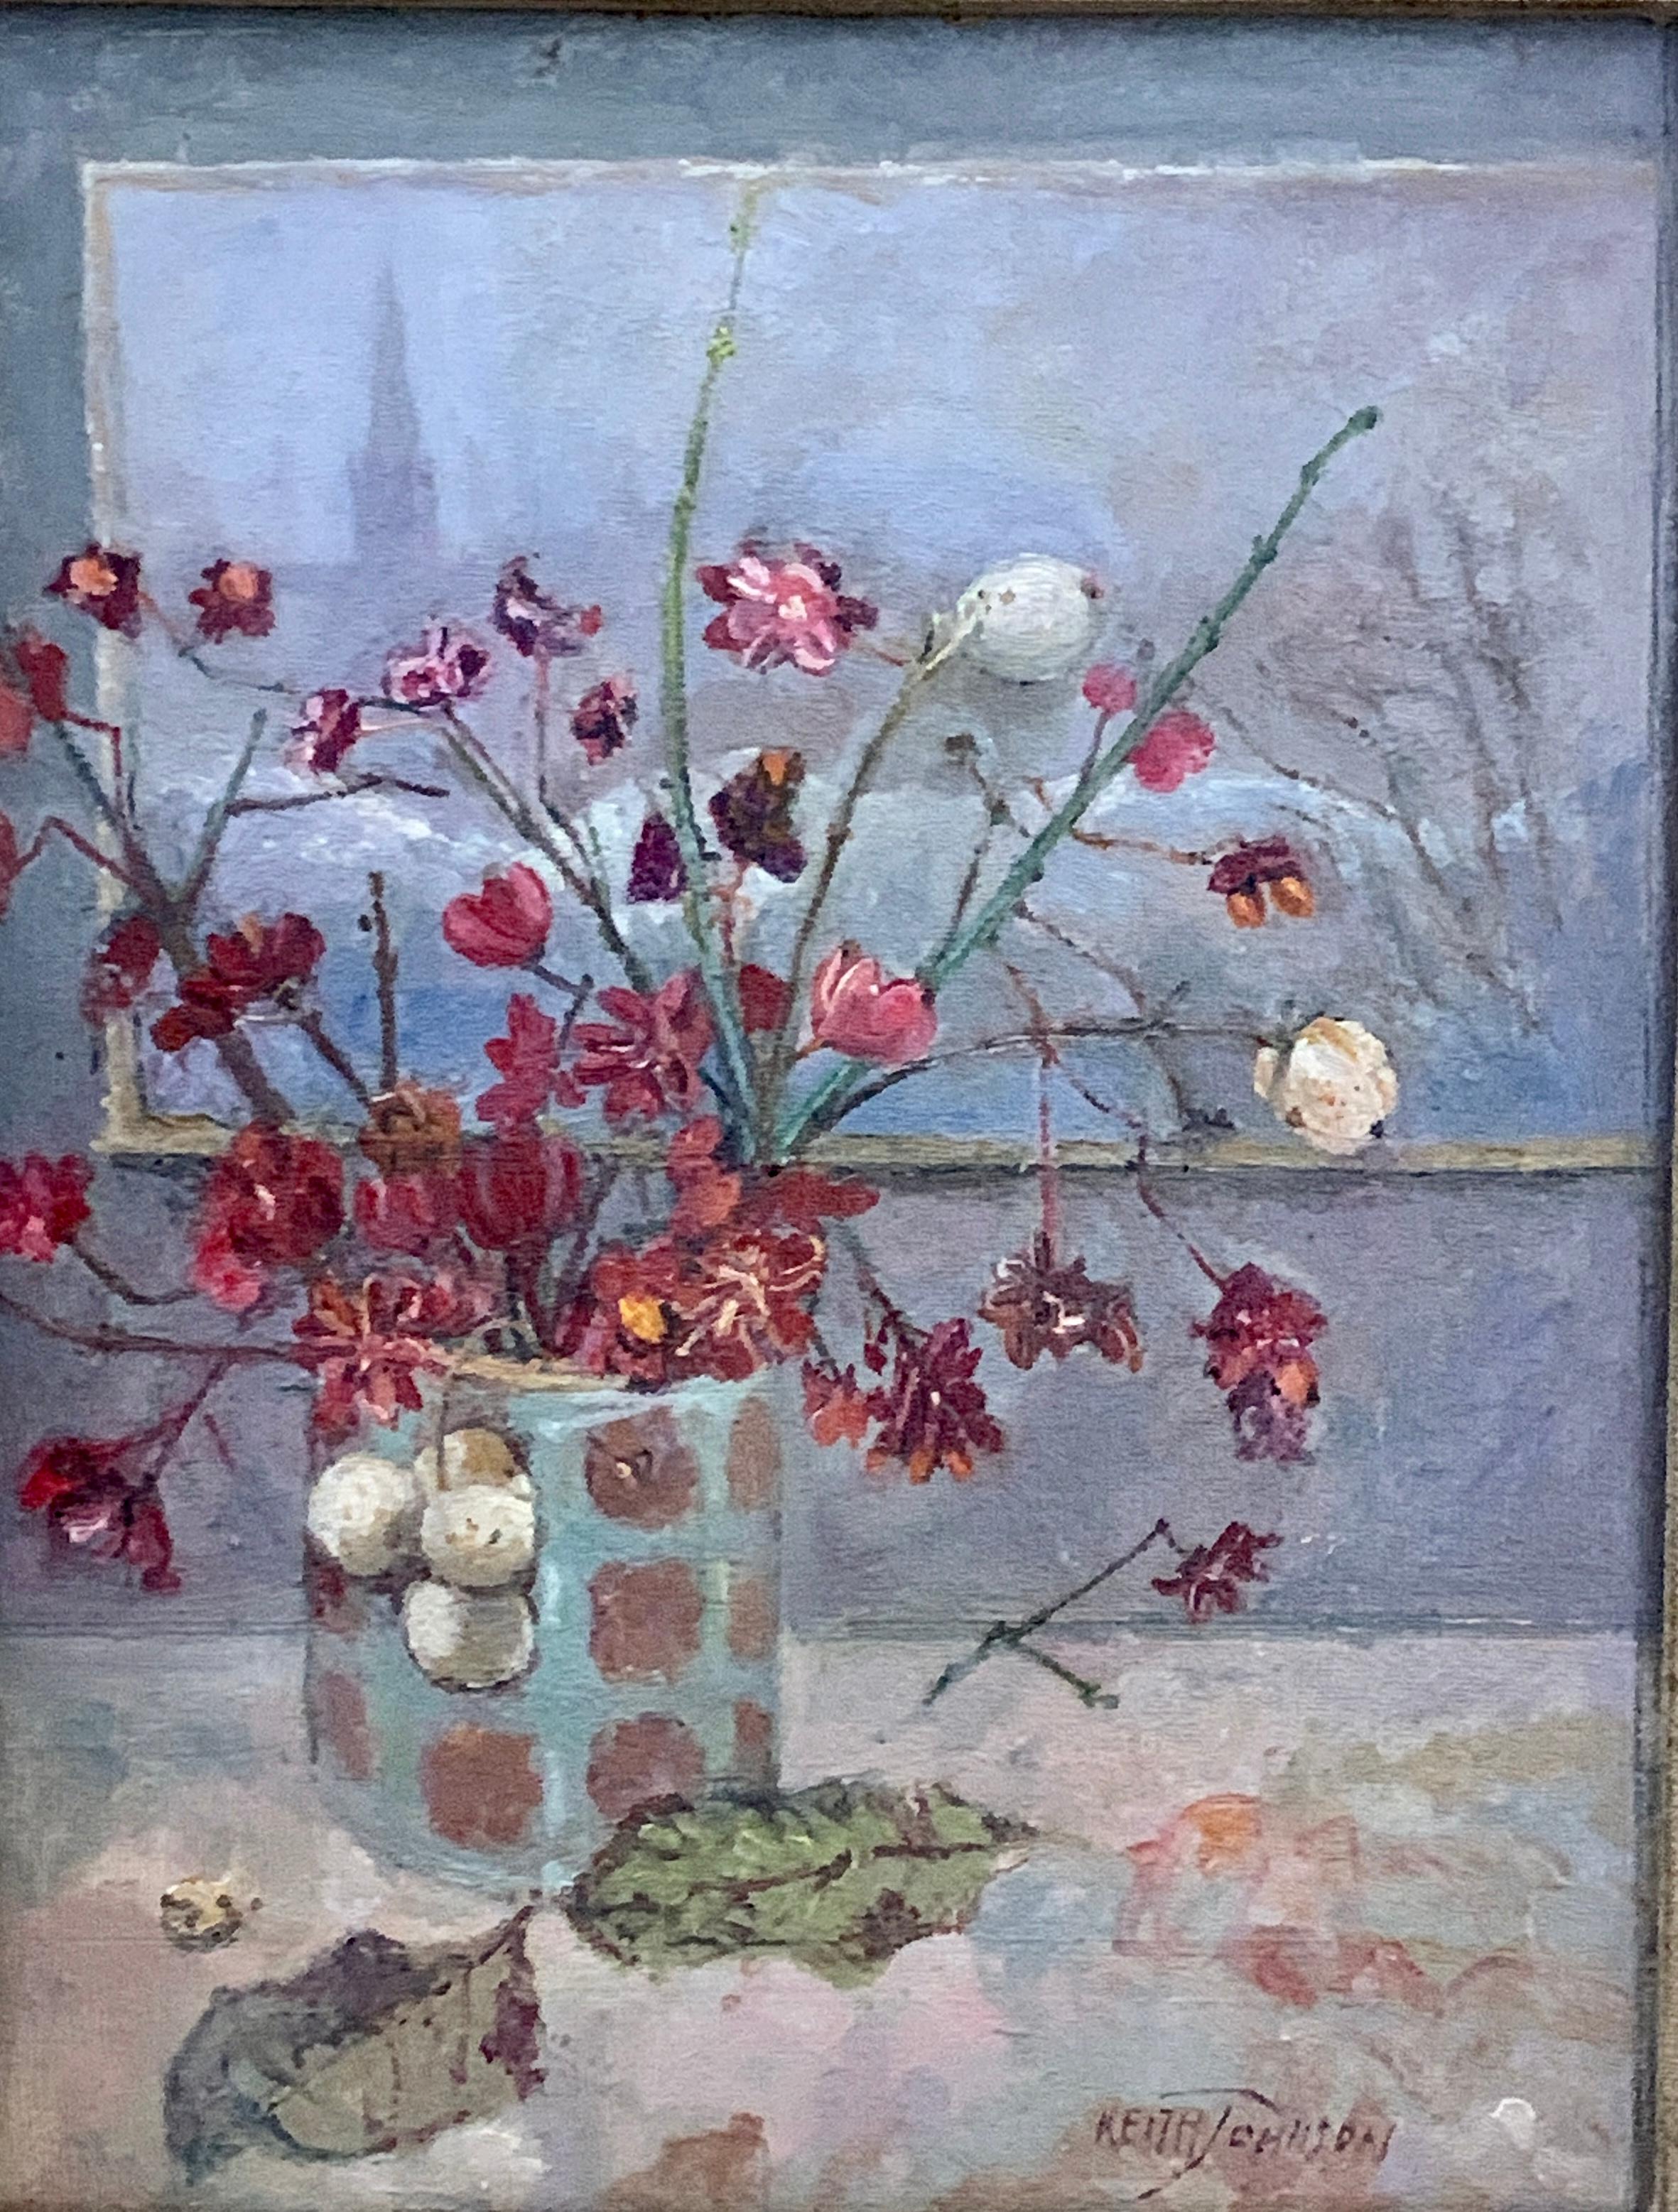 Impressionist English 20th century still life of flowers, Euonymus, snowberries - Painting by Keith Johnson